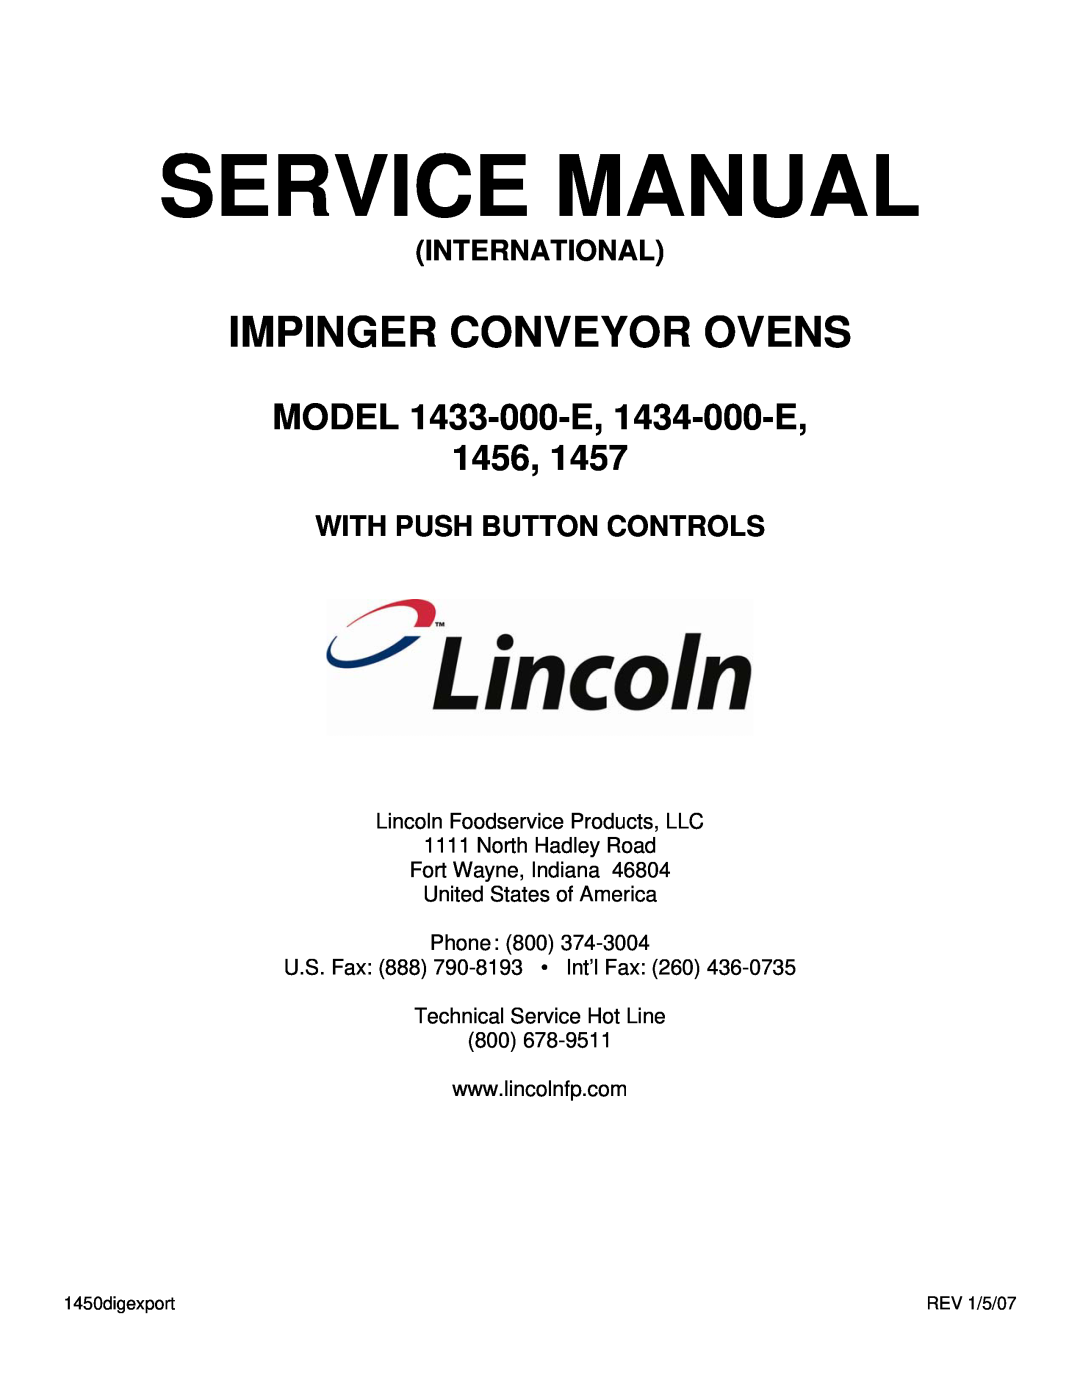 Lincoln 1434-000-E service manual Lincoln Foodservice Products, LLC, North Hadley Road Fort Wayne, Indiana, 1450digexport 